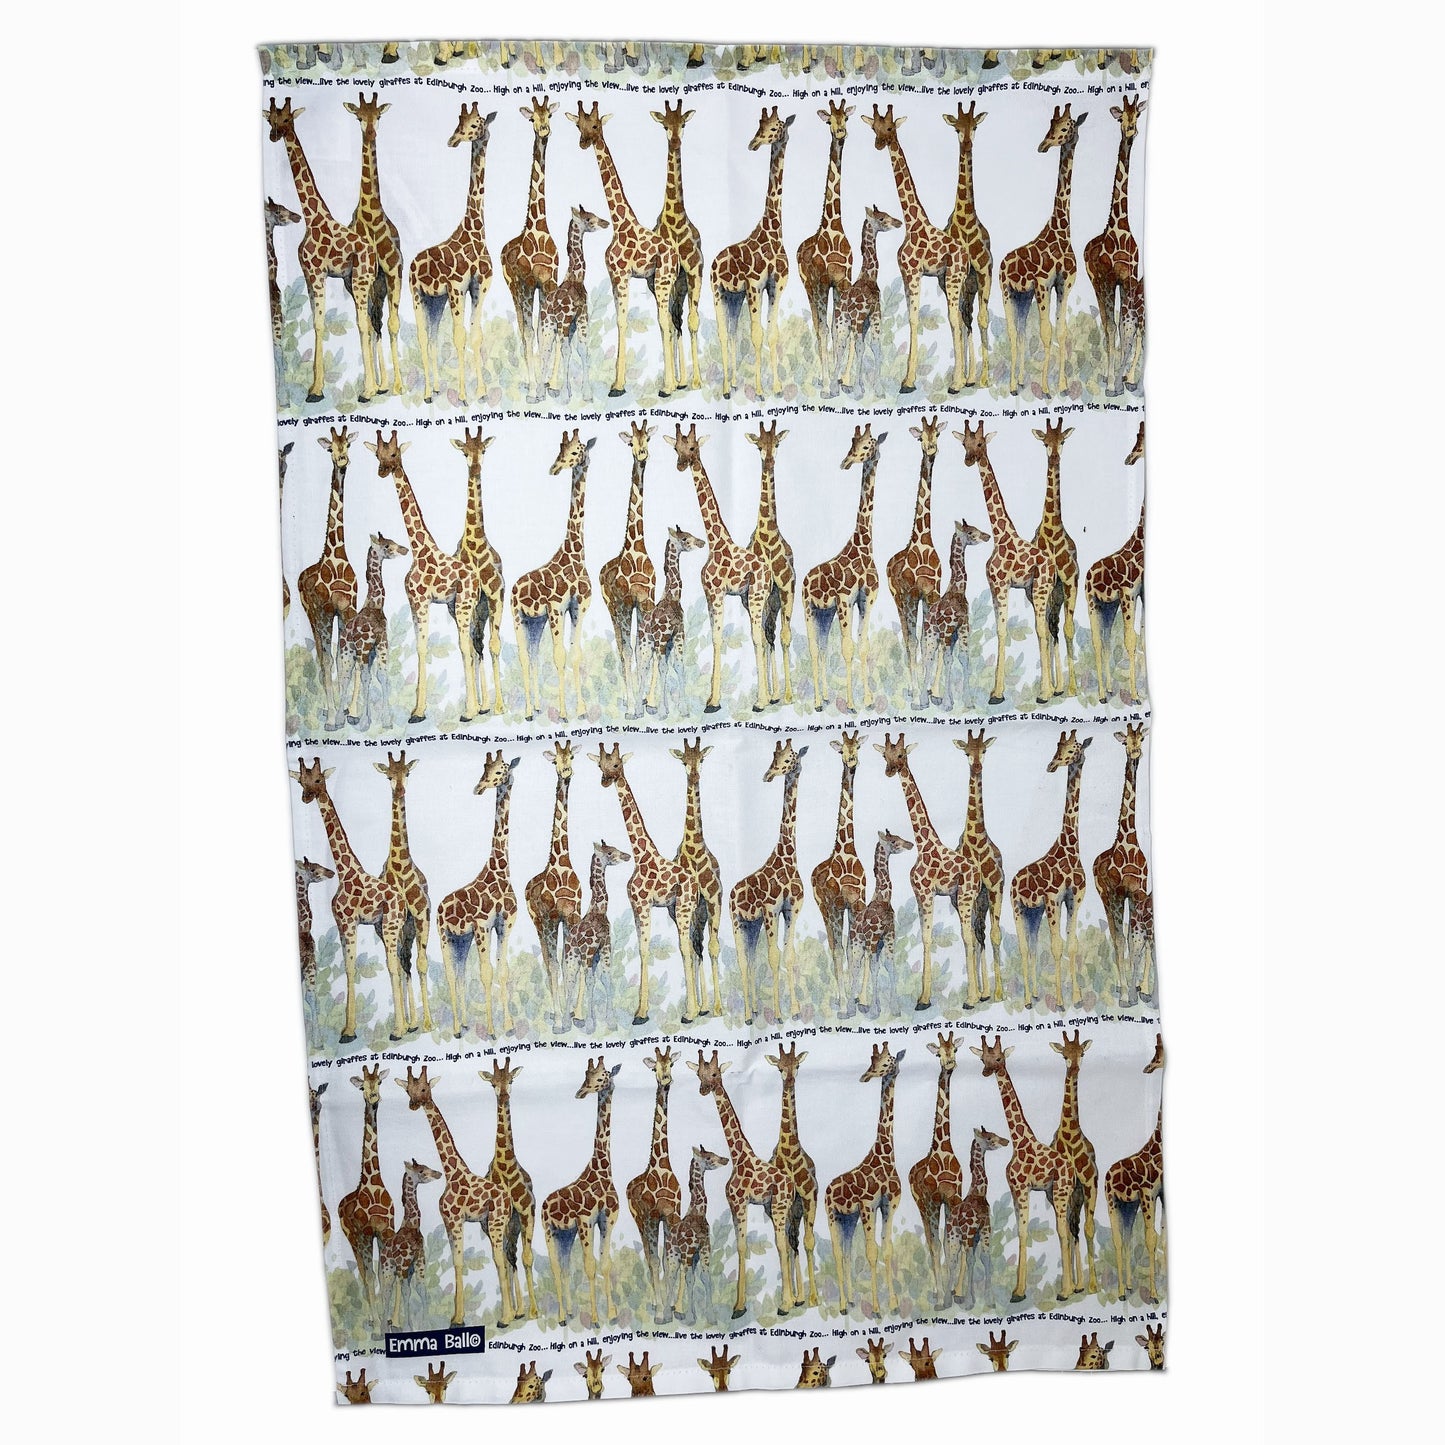 This beautiful tea towel shows an Edinburgh Zoo exclusive giraffes design by Emma Ball. It would be an ideal gift for any cooking enthusiast, or would be a great addition to your kitchen!   Designed and made in the UK.   Dimensions: 48 x 76cm. 